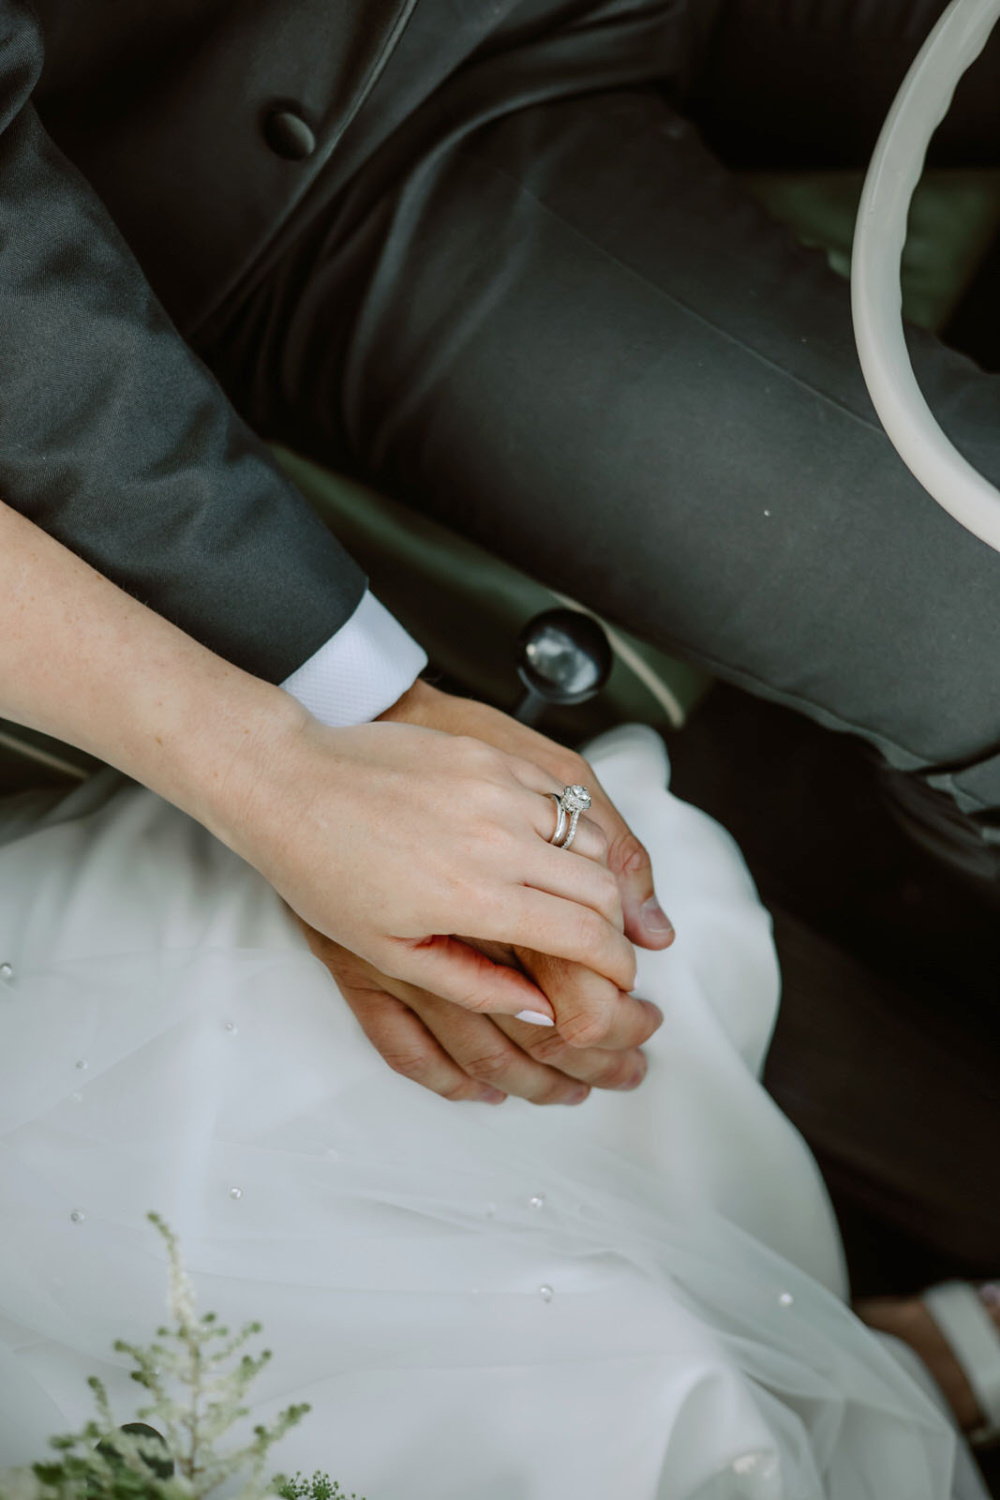 A bride and groom holding hands in a car.